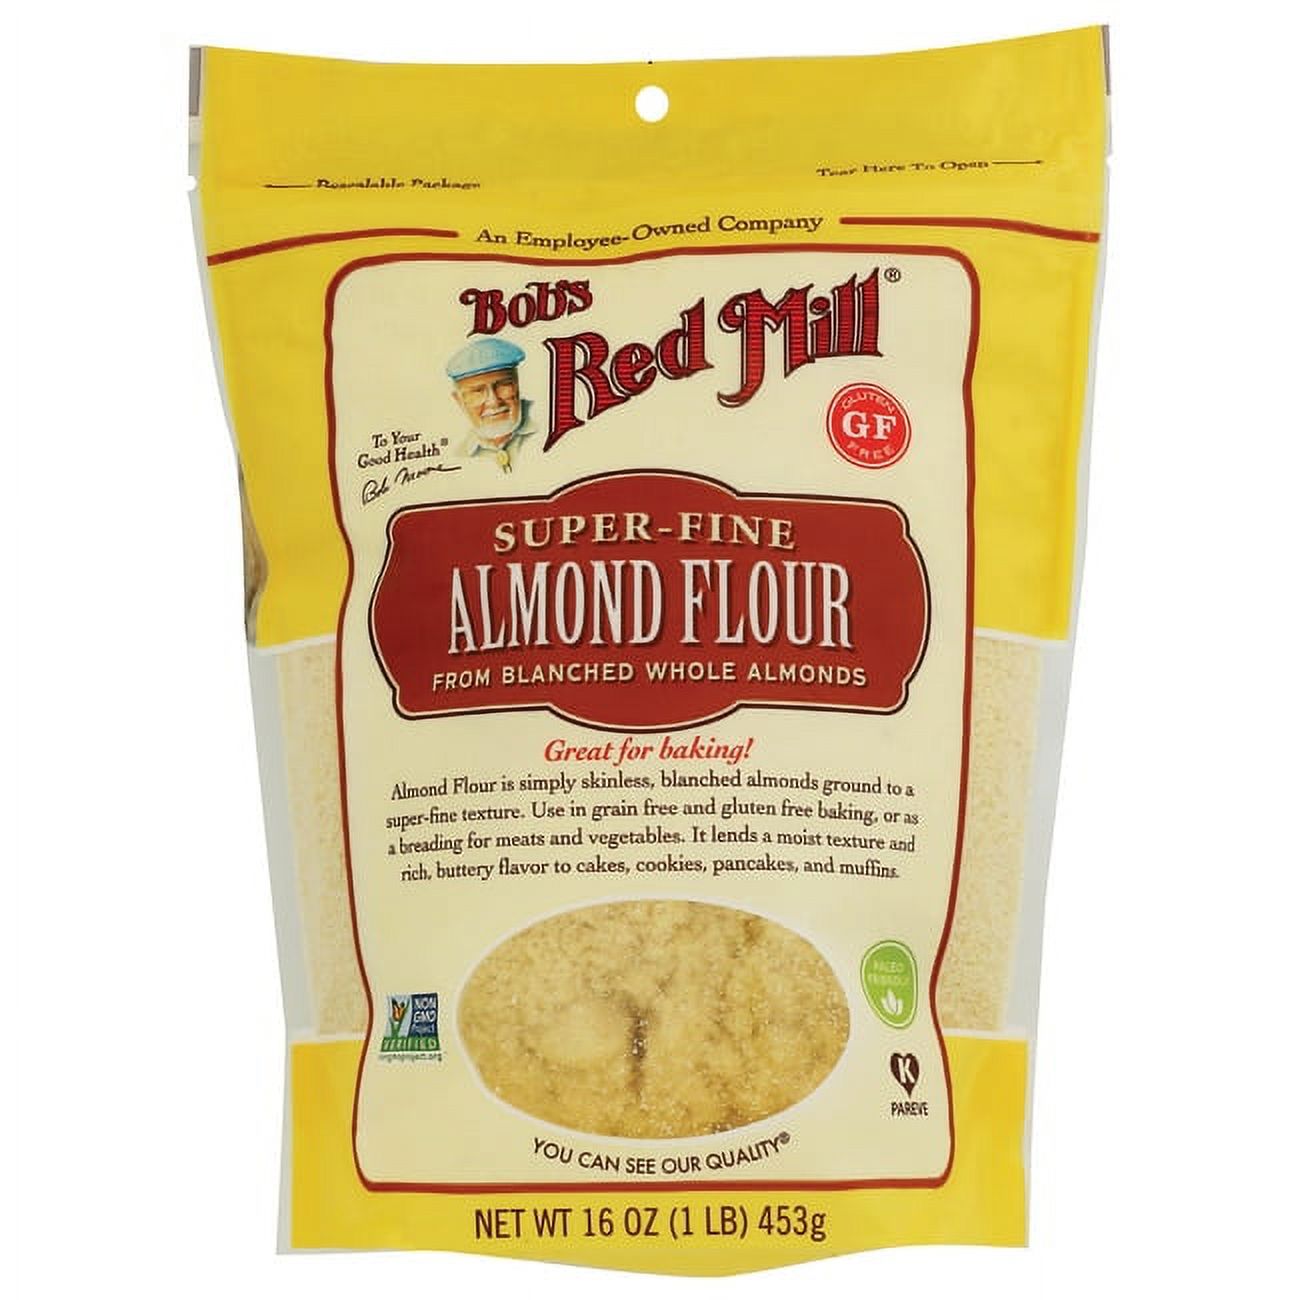 Bob's Red Mill Super Fine Almond Flour, 16 oz Resealable Bag - image 1 of 2